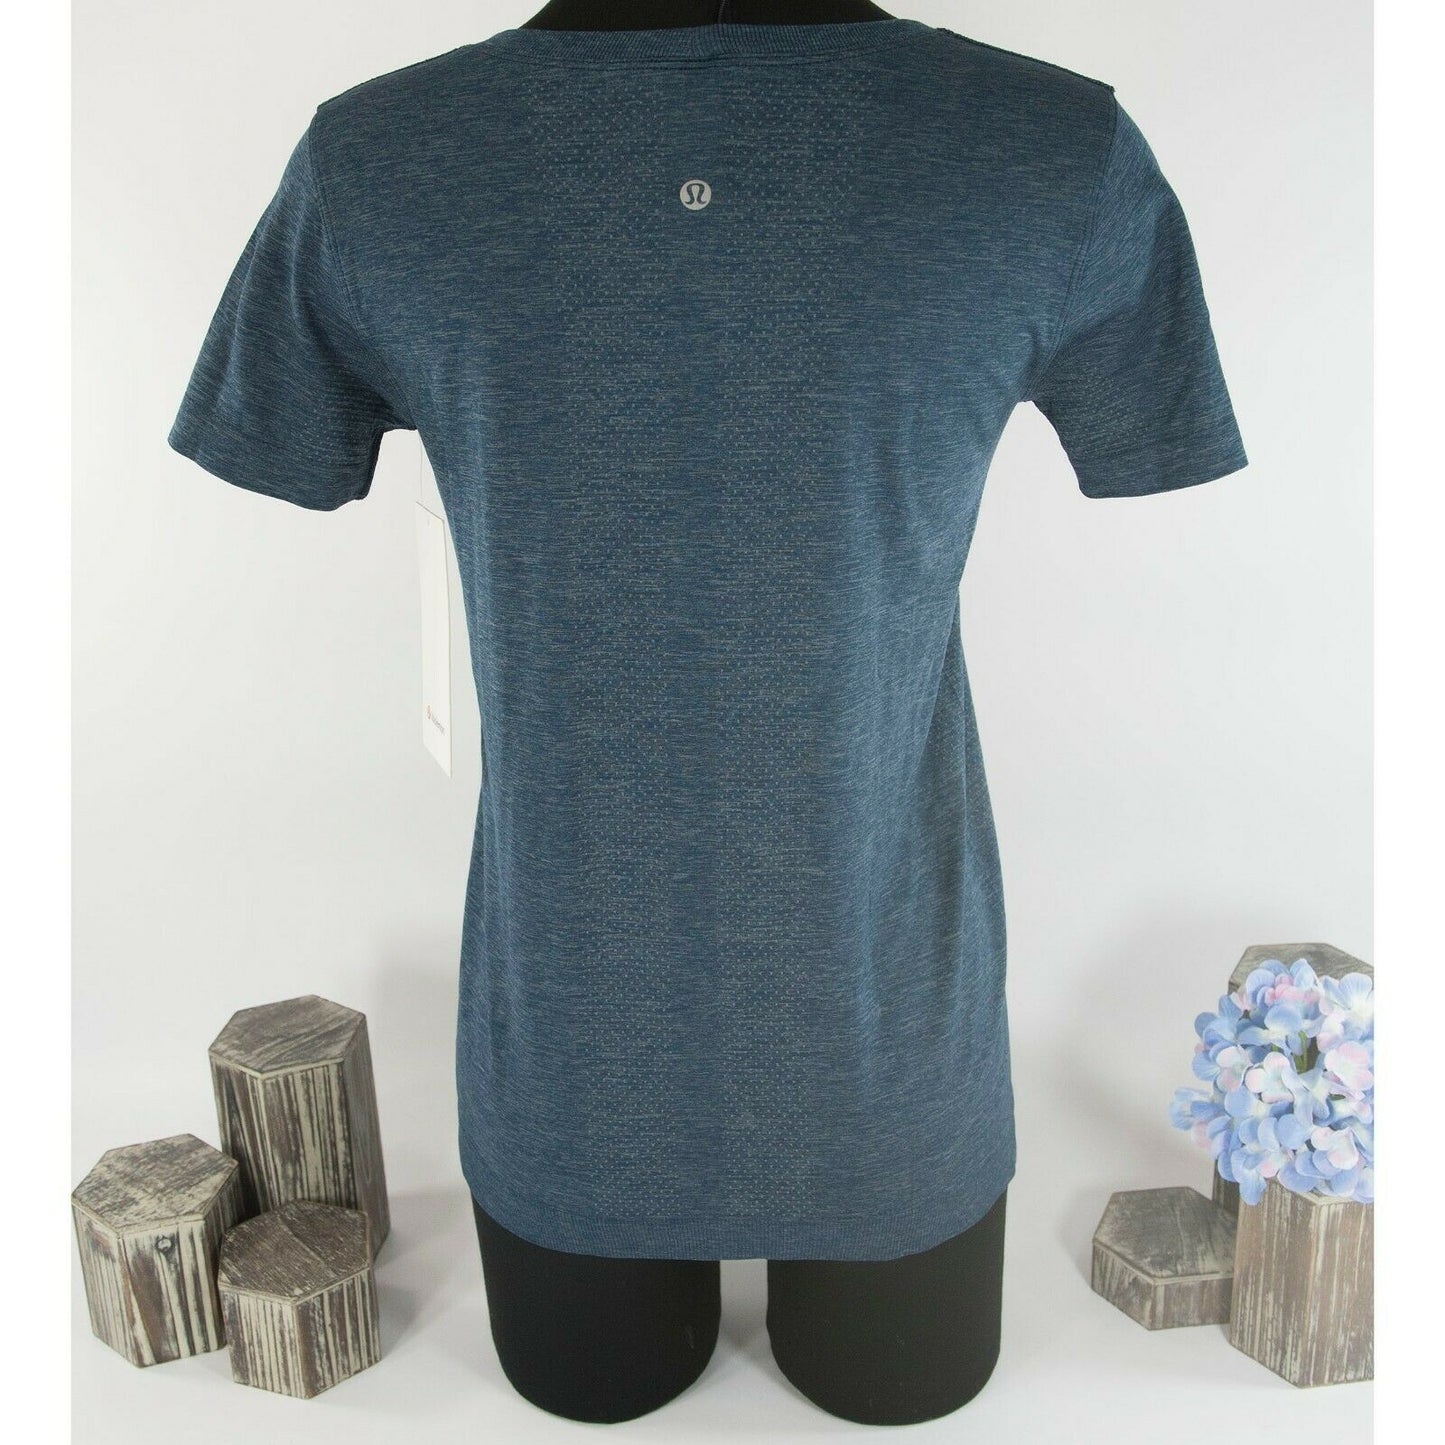 Lululemon Blue Swiftly Relaxed Athletica Knit Short Sleeve T-Shirt Top Sz 4 NWT